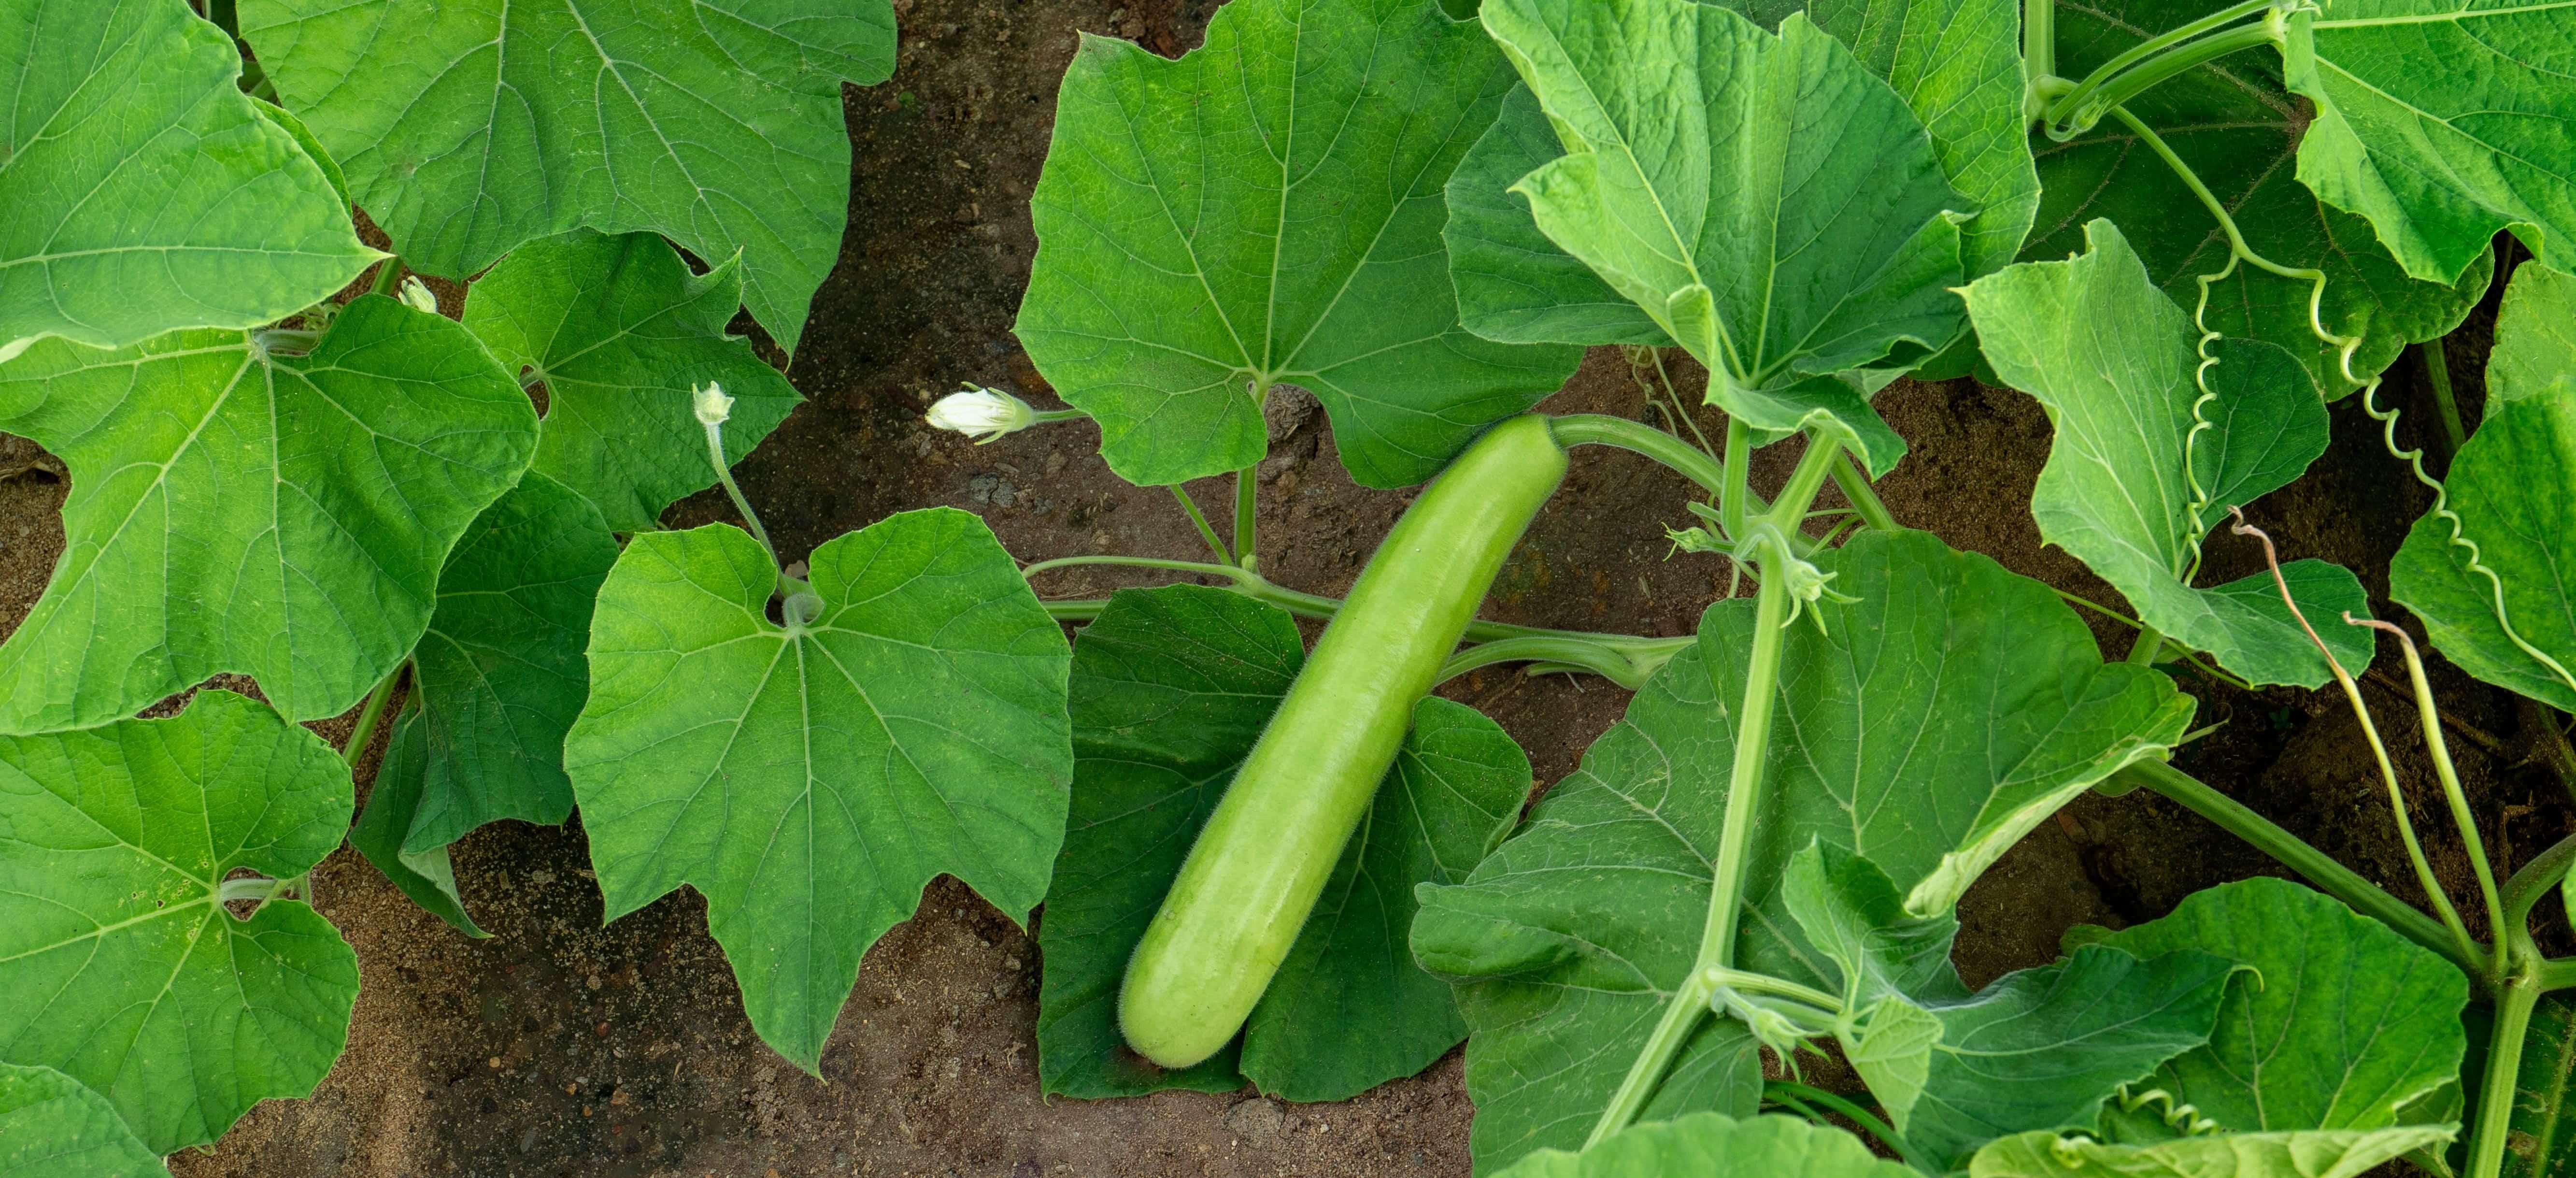 What Should Be The Proper Climate For Bottle Gourd Cultivation